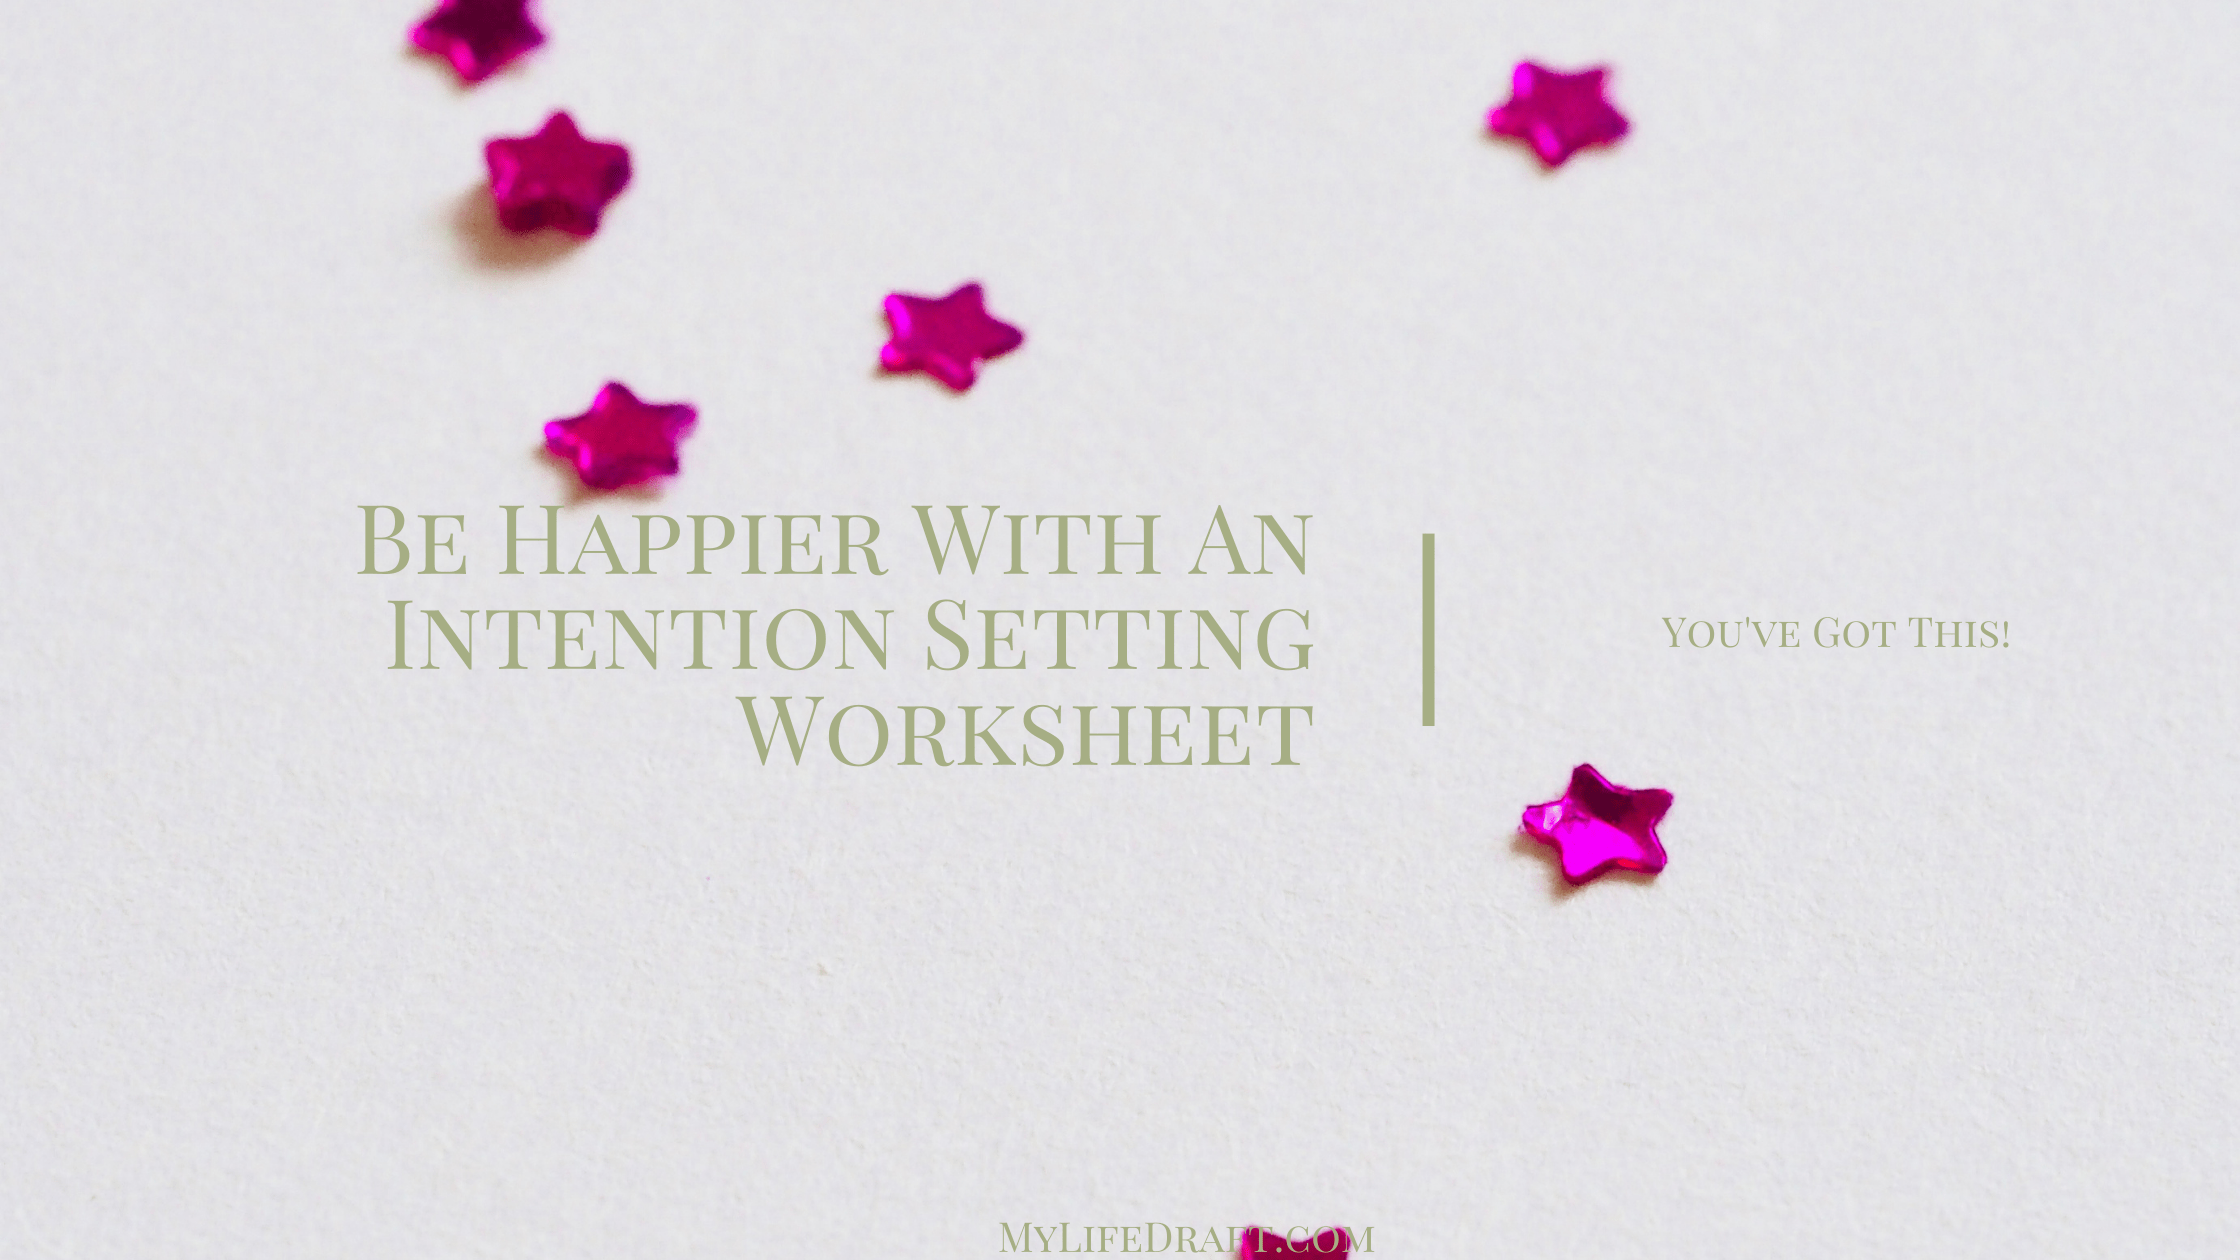 Be happier with an Intention Setting Worksheet